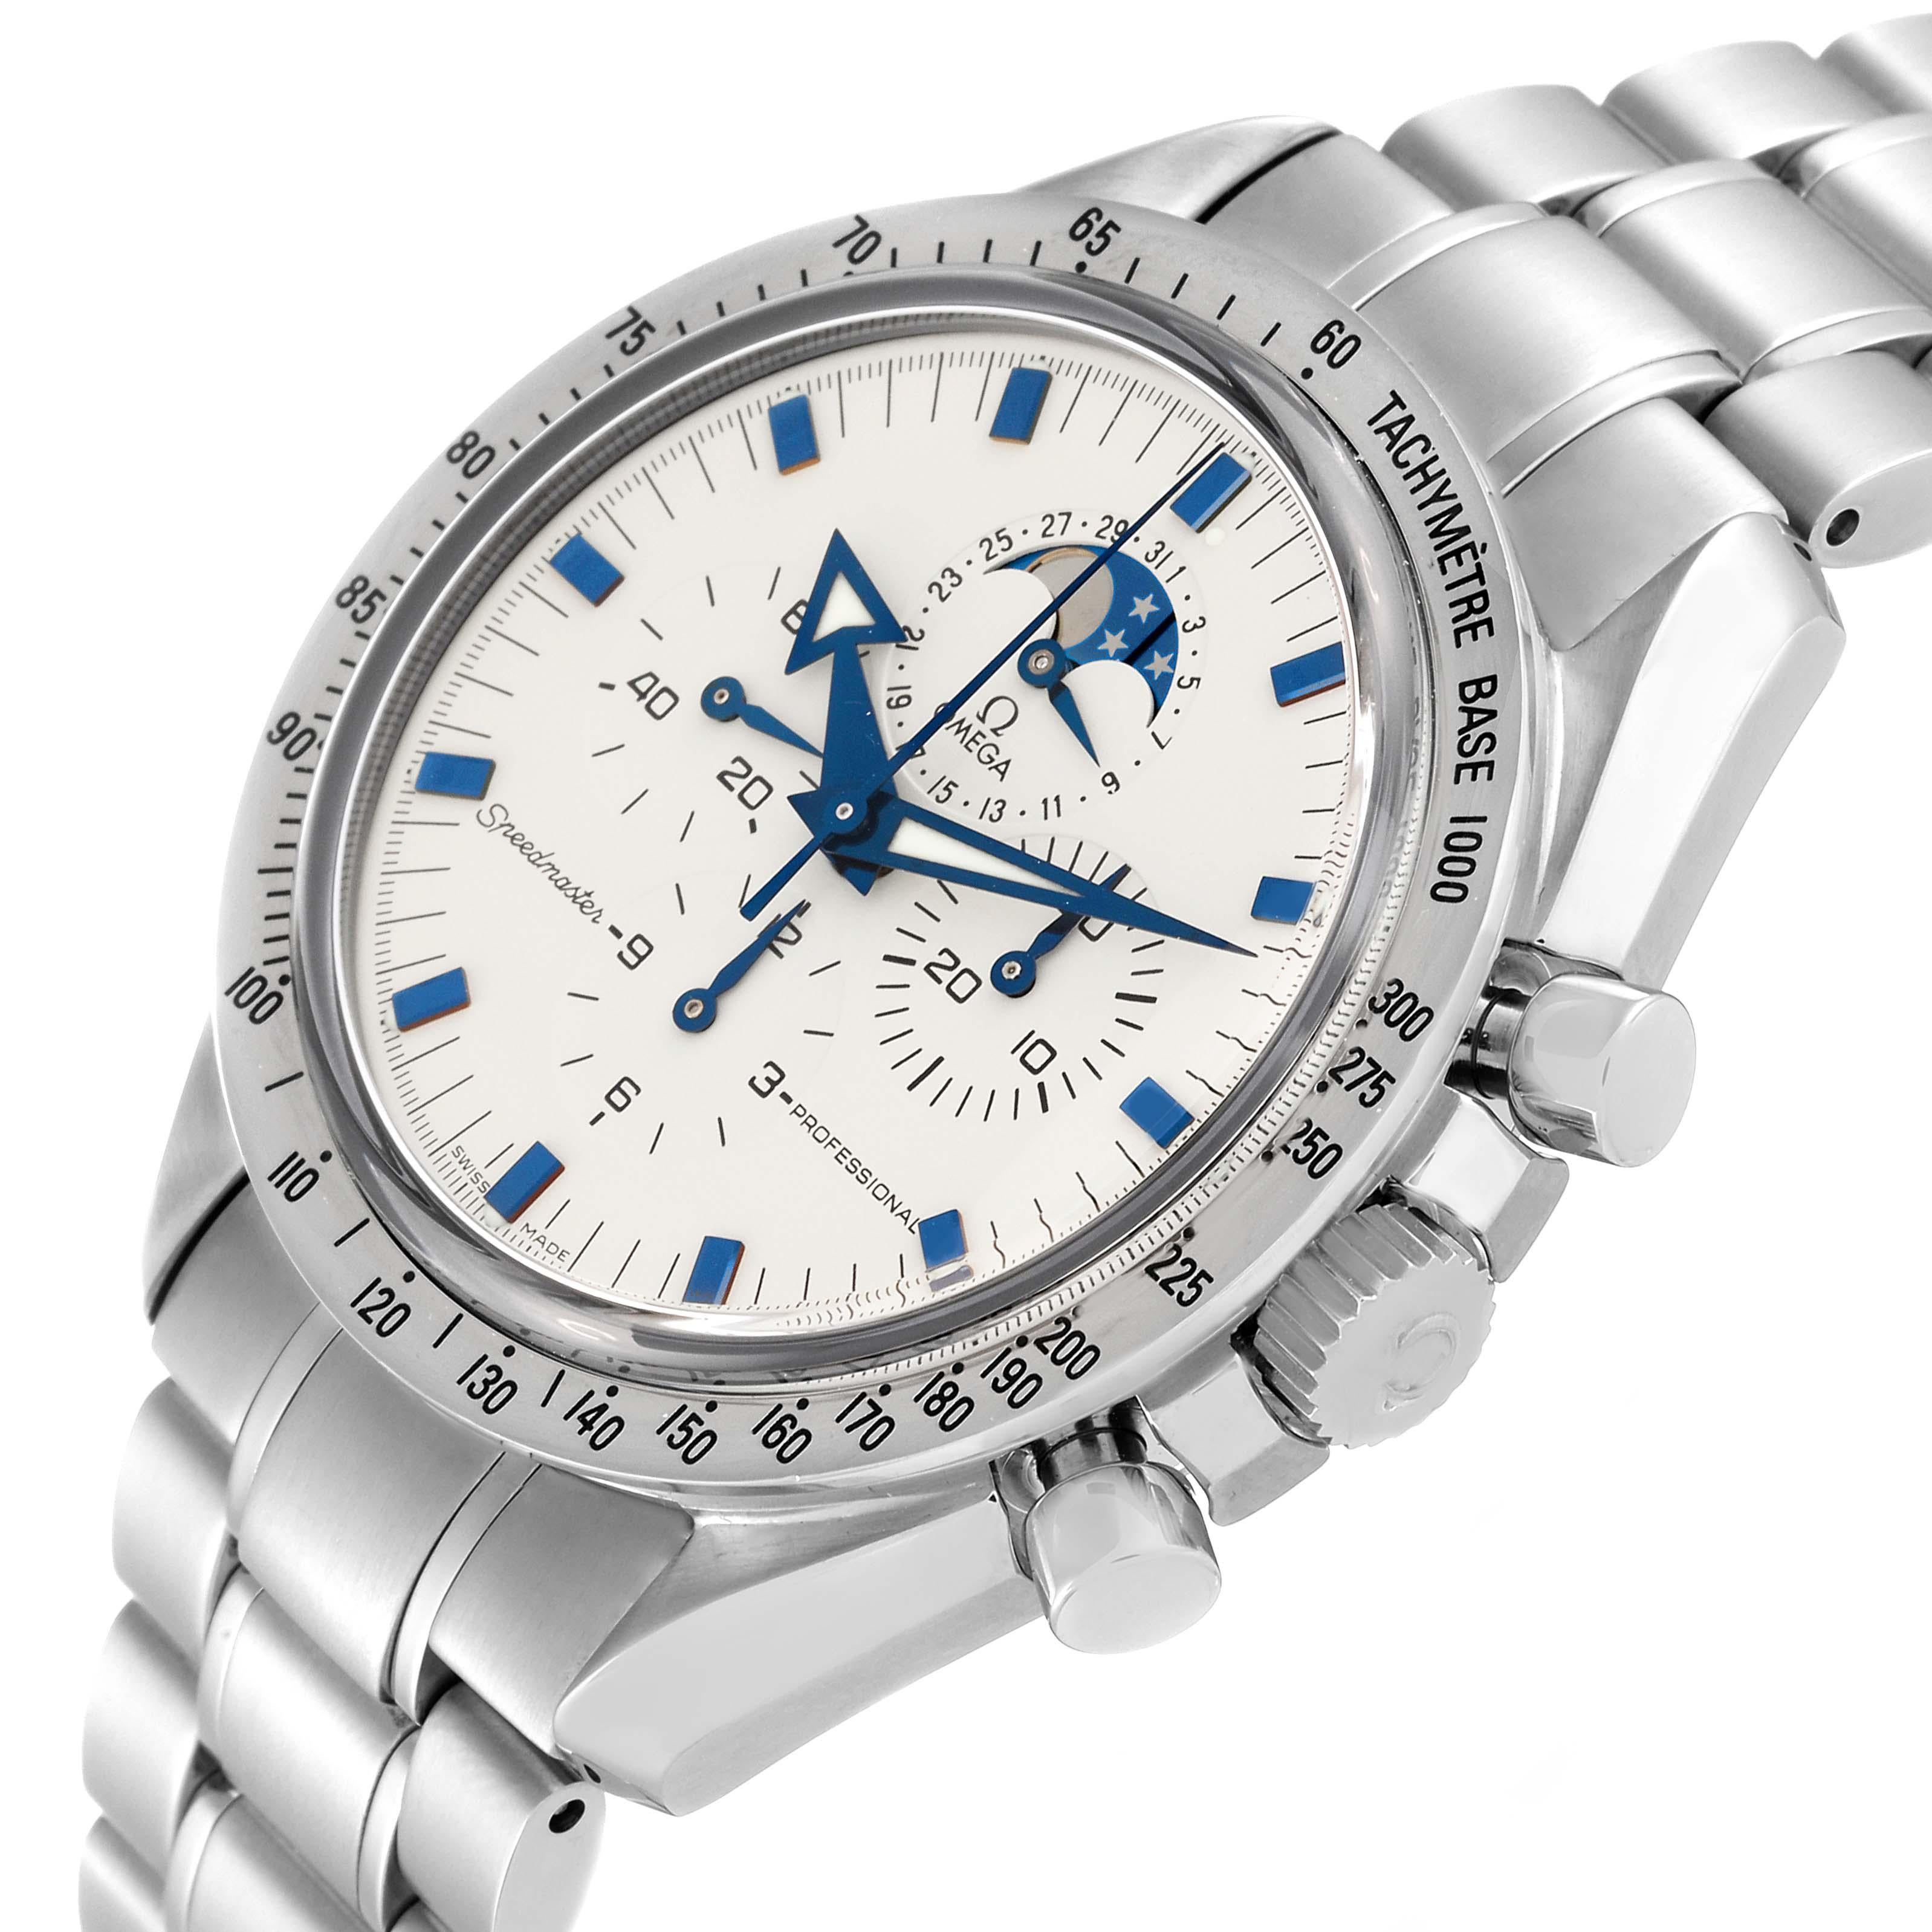 Omega Speedmaster Moon Phase Chronograph Steel Mens Watch 3575.20.00 Box Card. Manual-winding chronograph movement. Stainless steel round case 42 mm in diameter. Stainless steel bezel with tachymetre function. Scratch-resistant sapphire crystal with